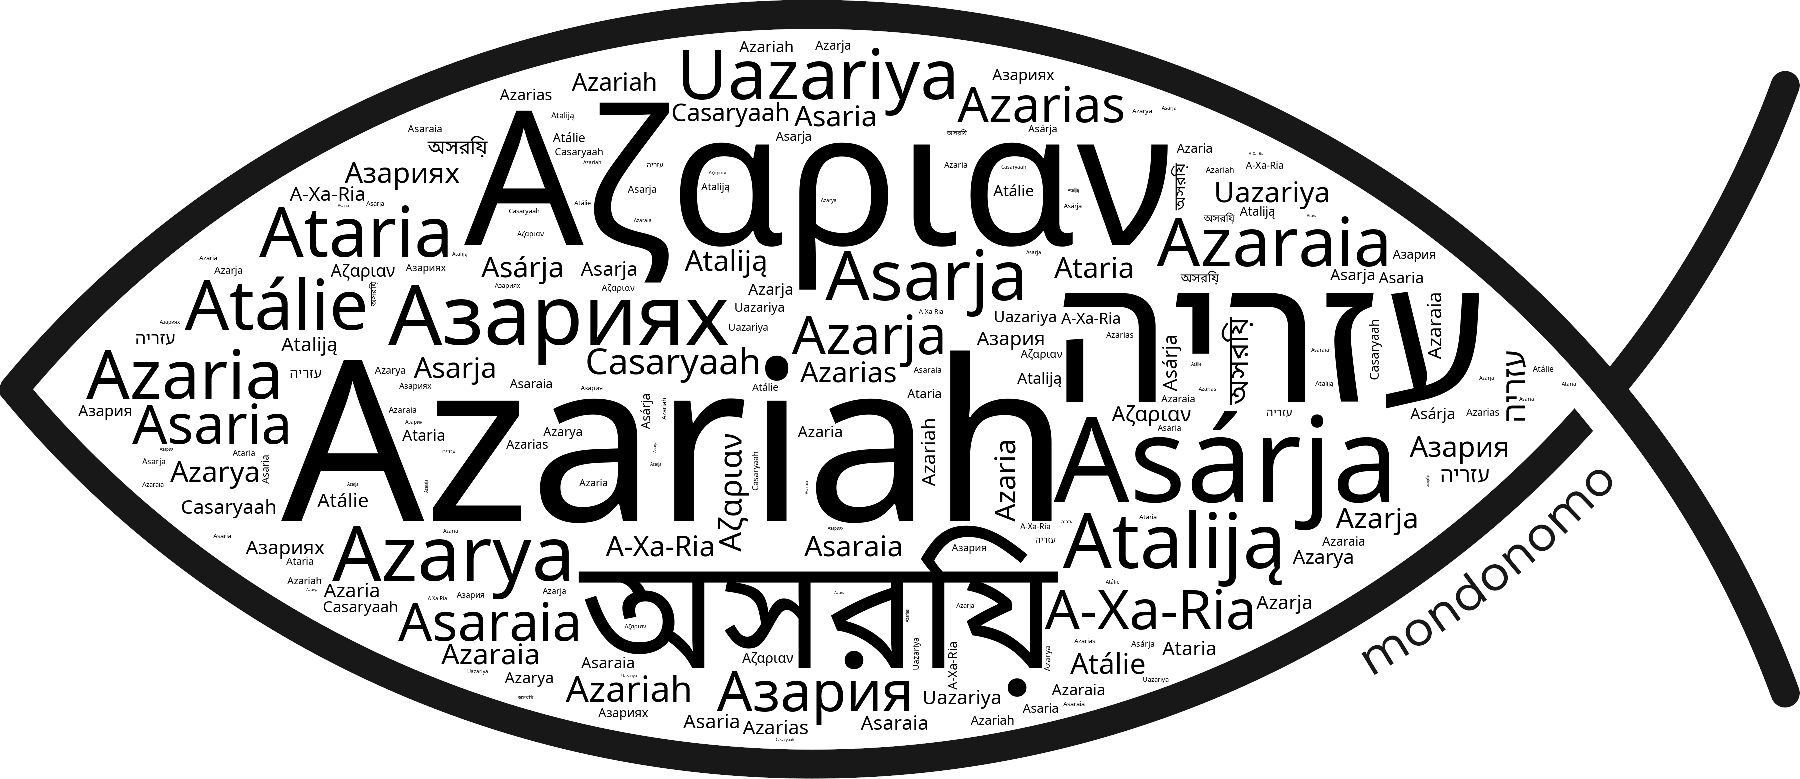 Name Azariah in the world's Bibles